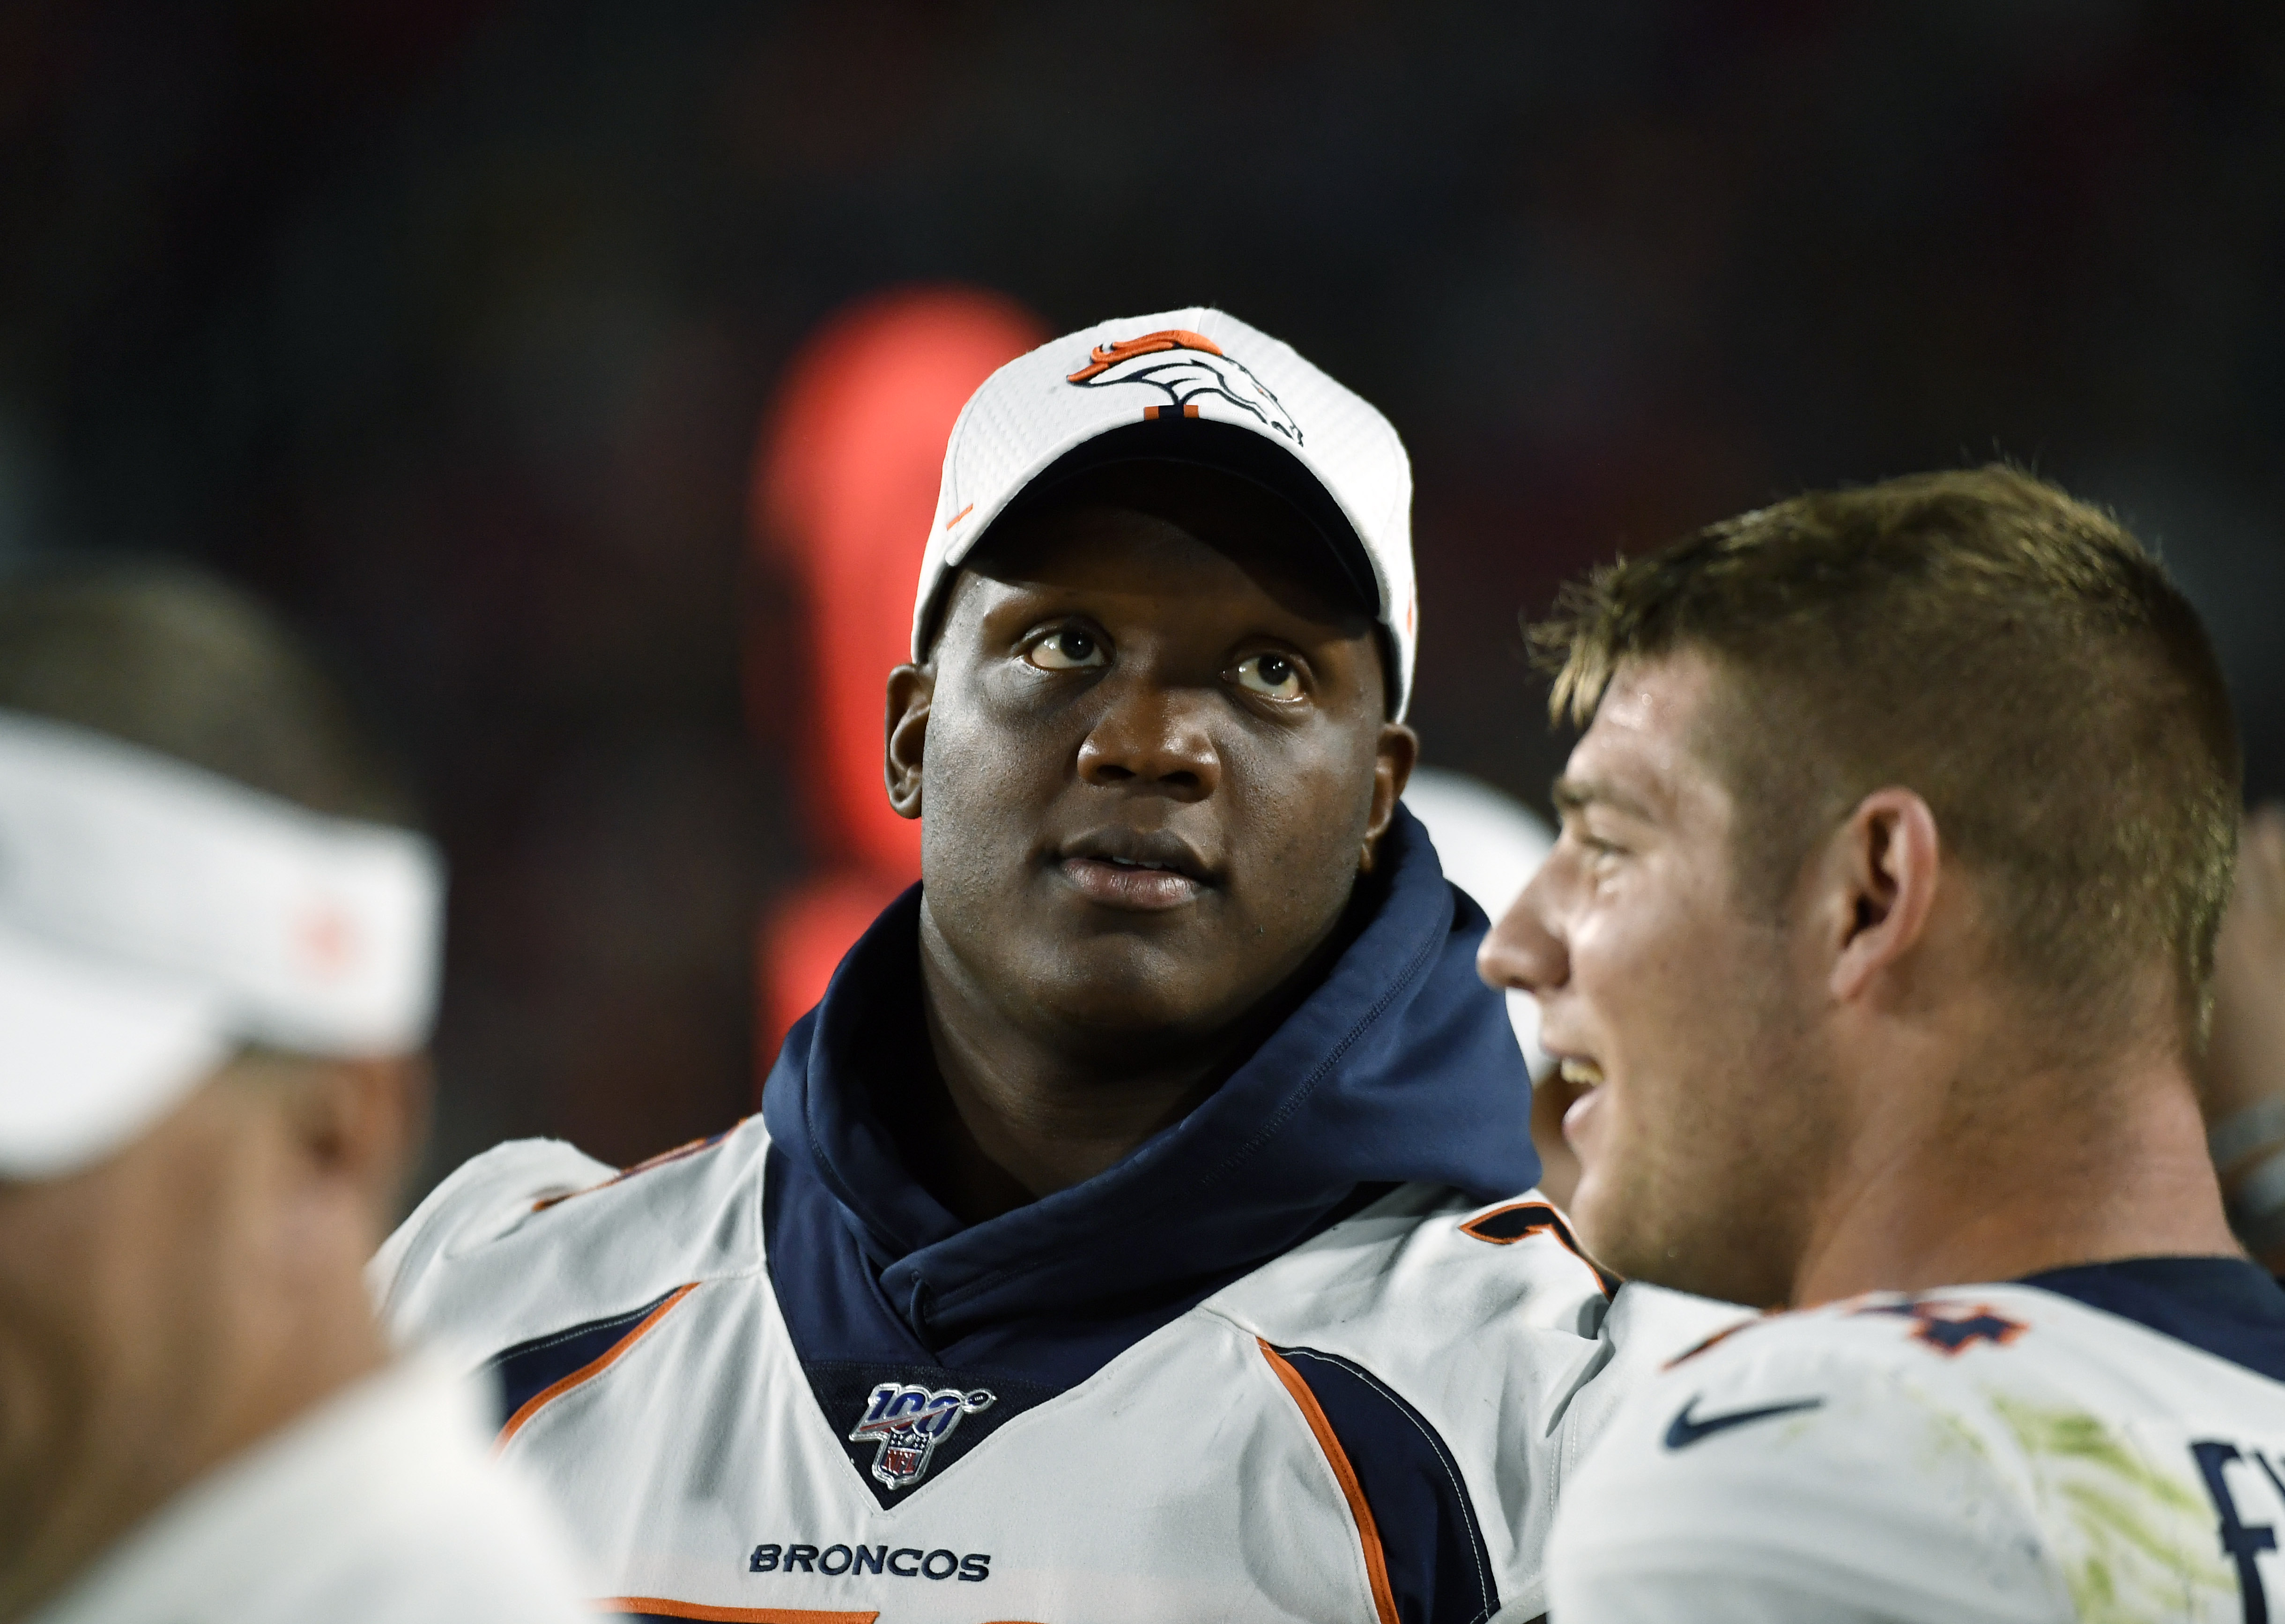 Denver Broncos Offensive tackle Ja'Wuan James on the sideline during a pre season game against the Los Angeles Rams of at Los Angeles Memorial Coliseum on August 24, 2019.